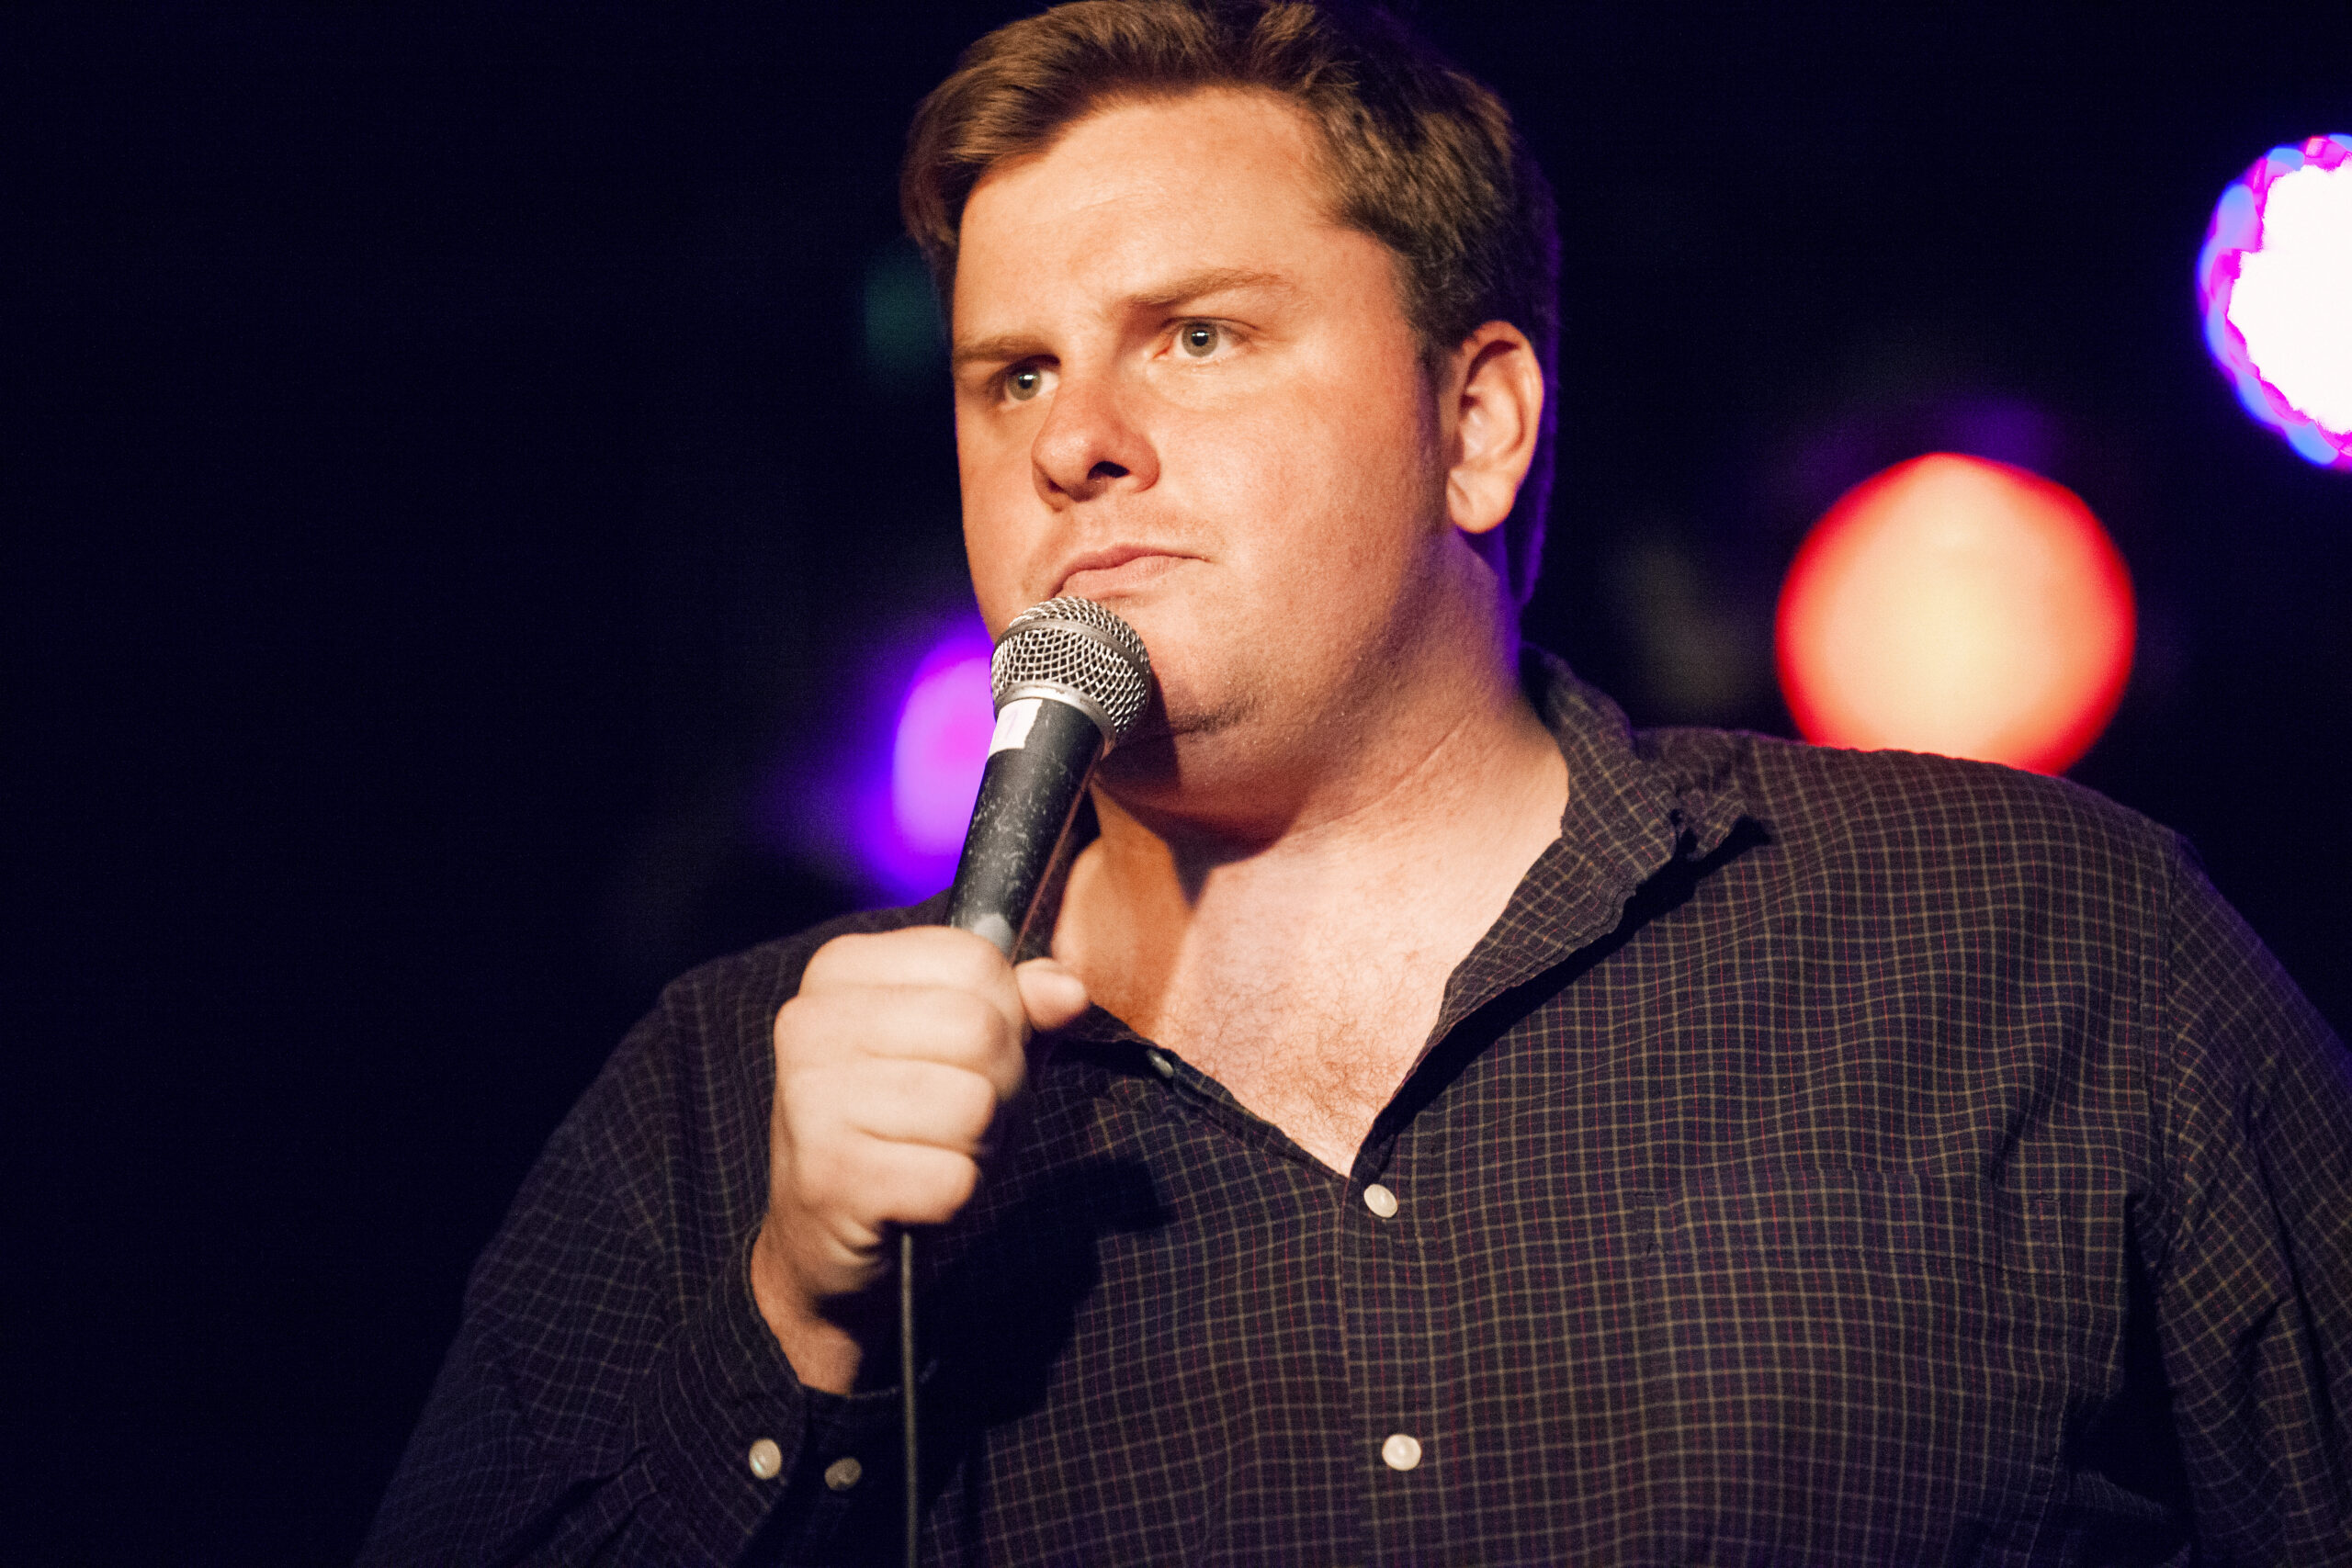 Comedian Tim Dillon performs at WHBPAC on August 7. COURTESY WHBPAC